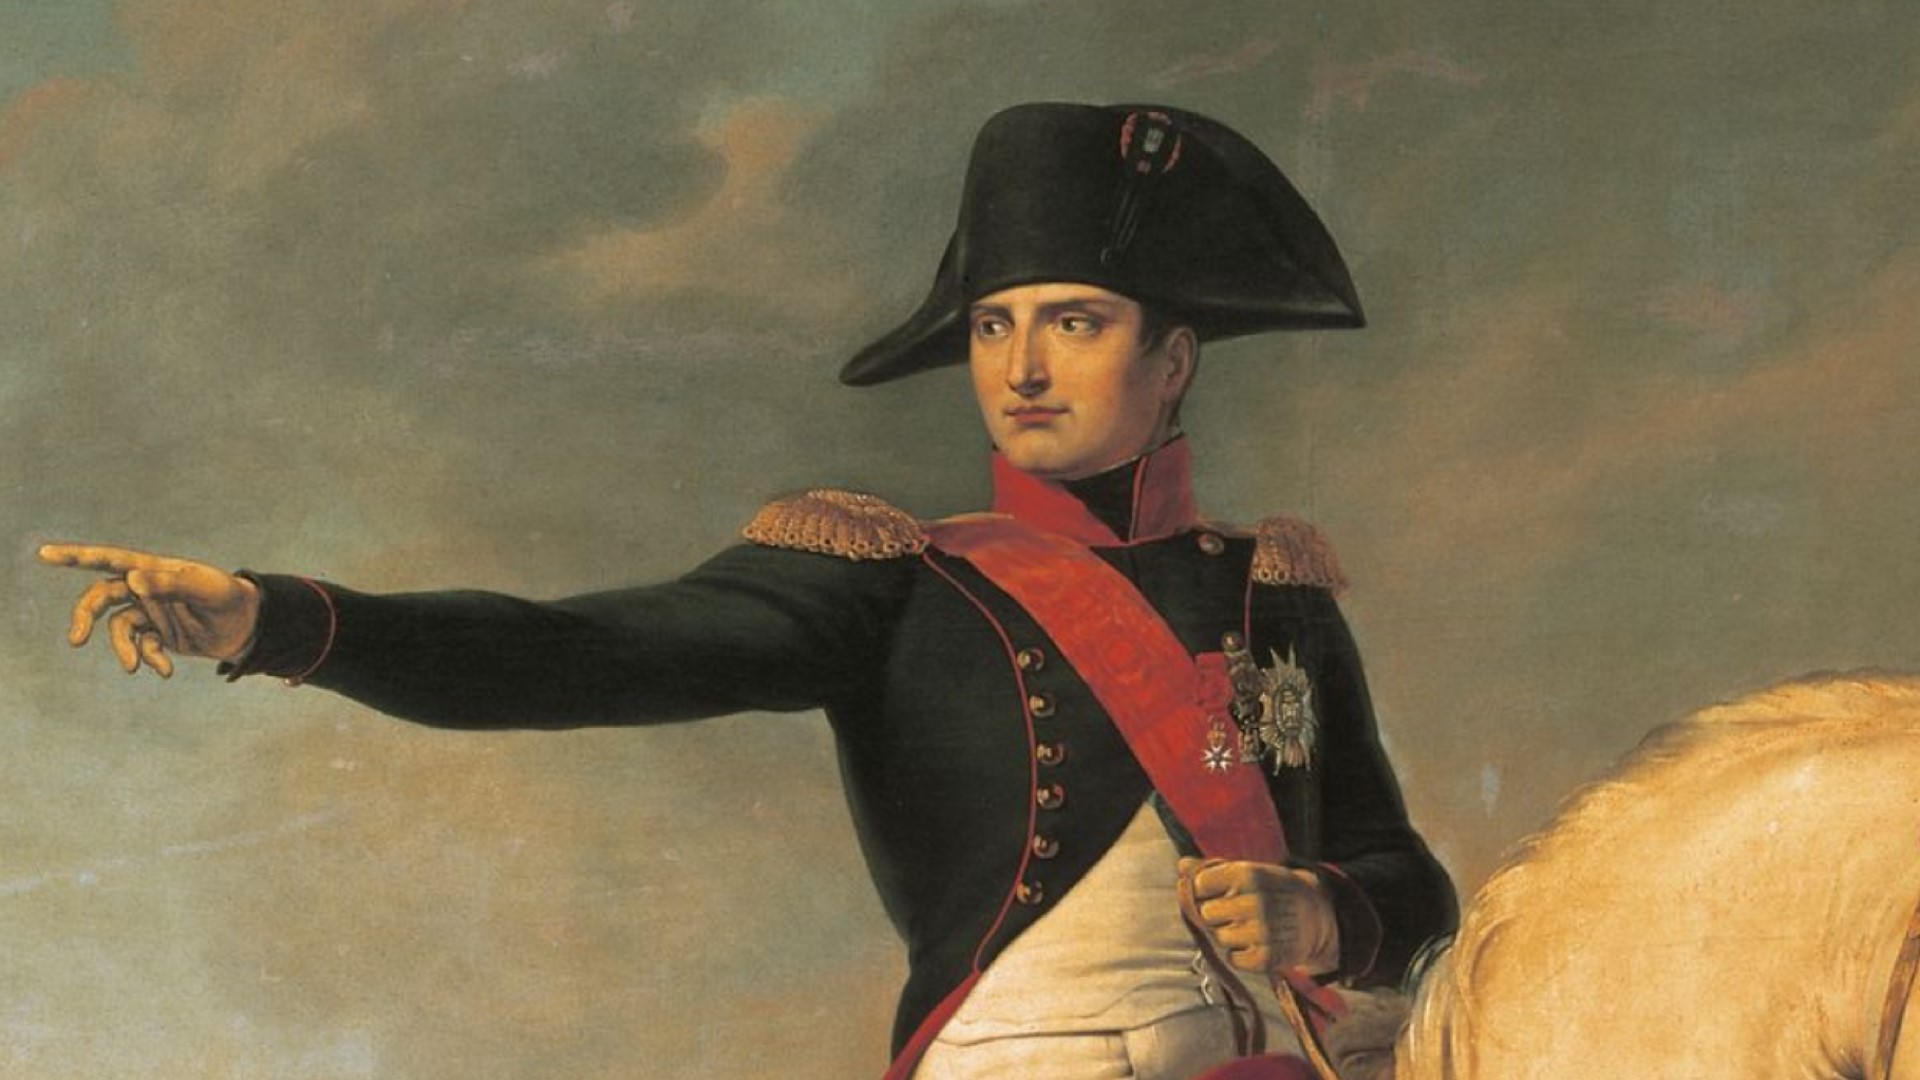 A huge amount of money for Napoleon's hat